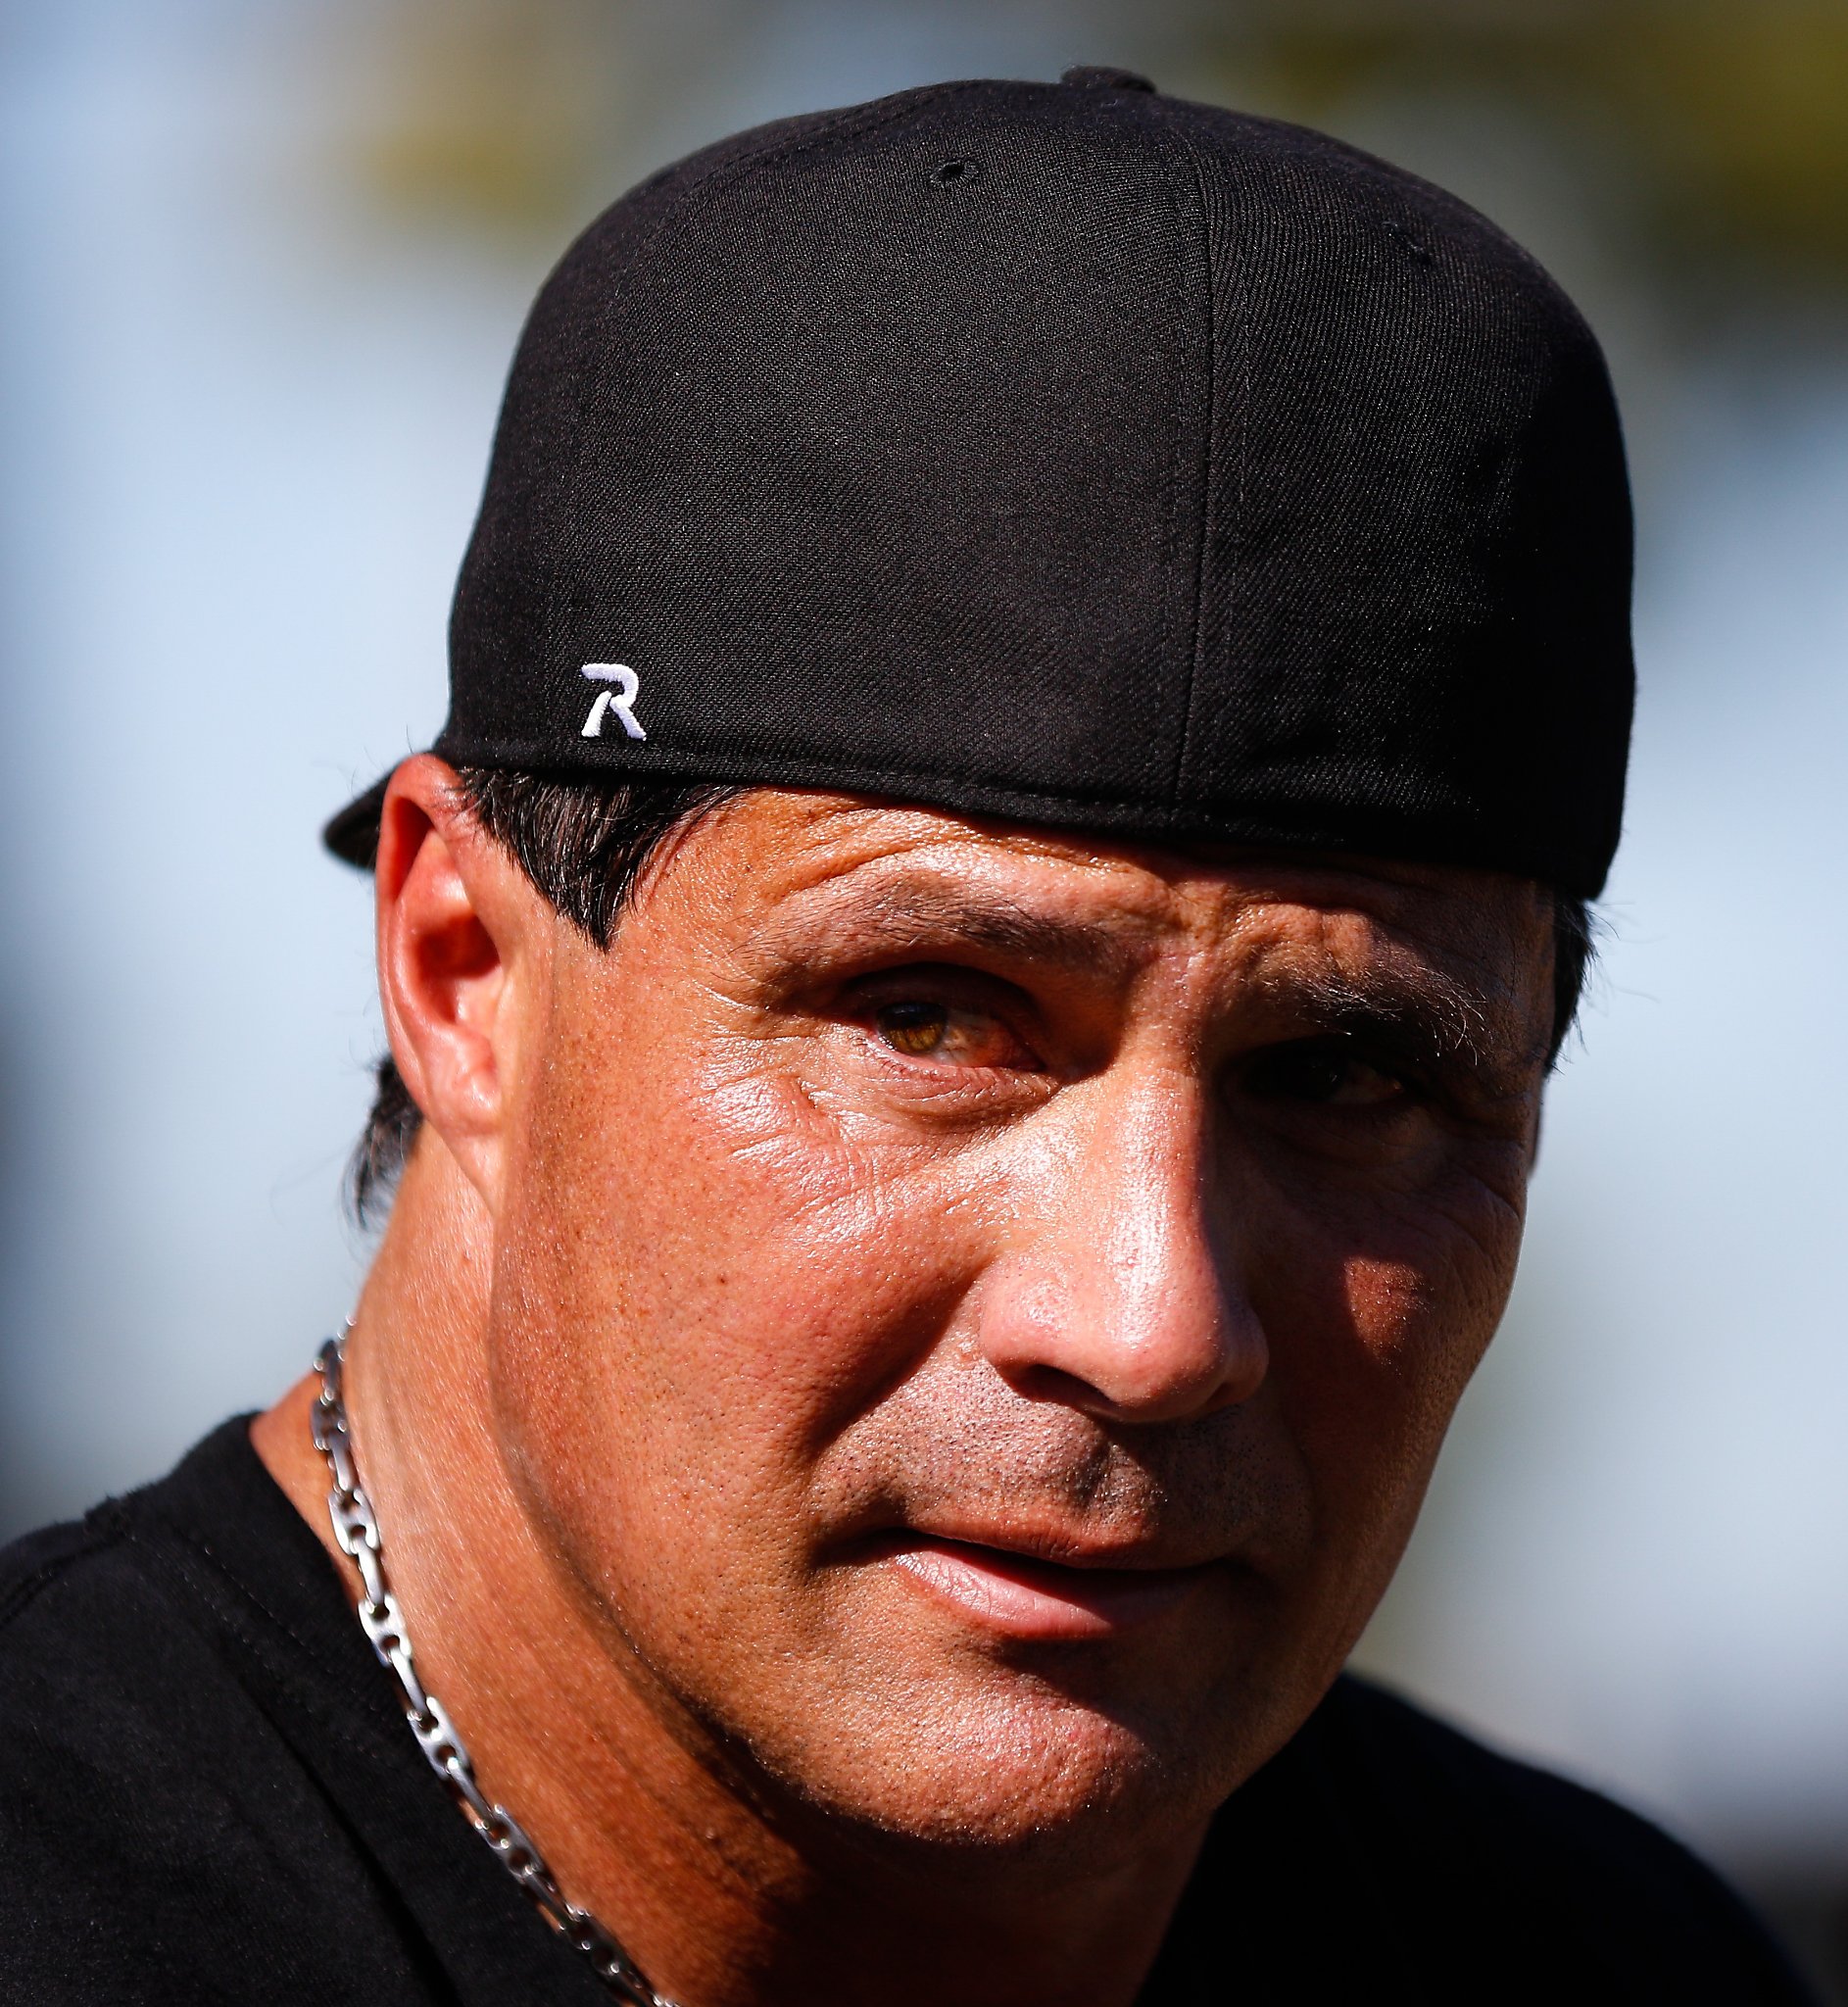 Jose Canseco will return to play for the Pittsburg Diamonds in